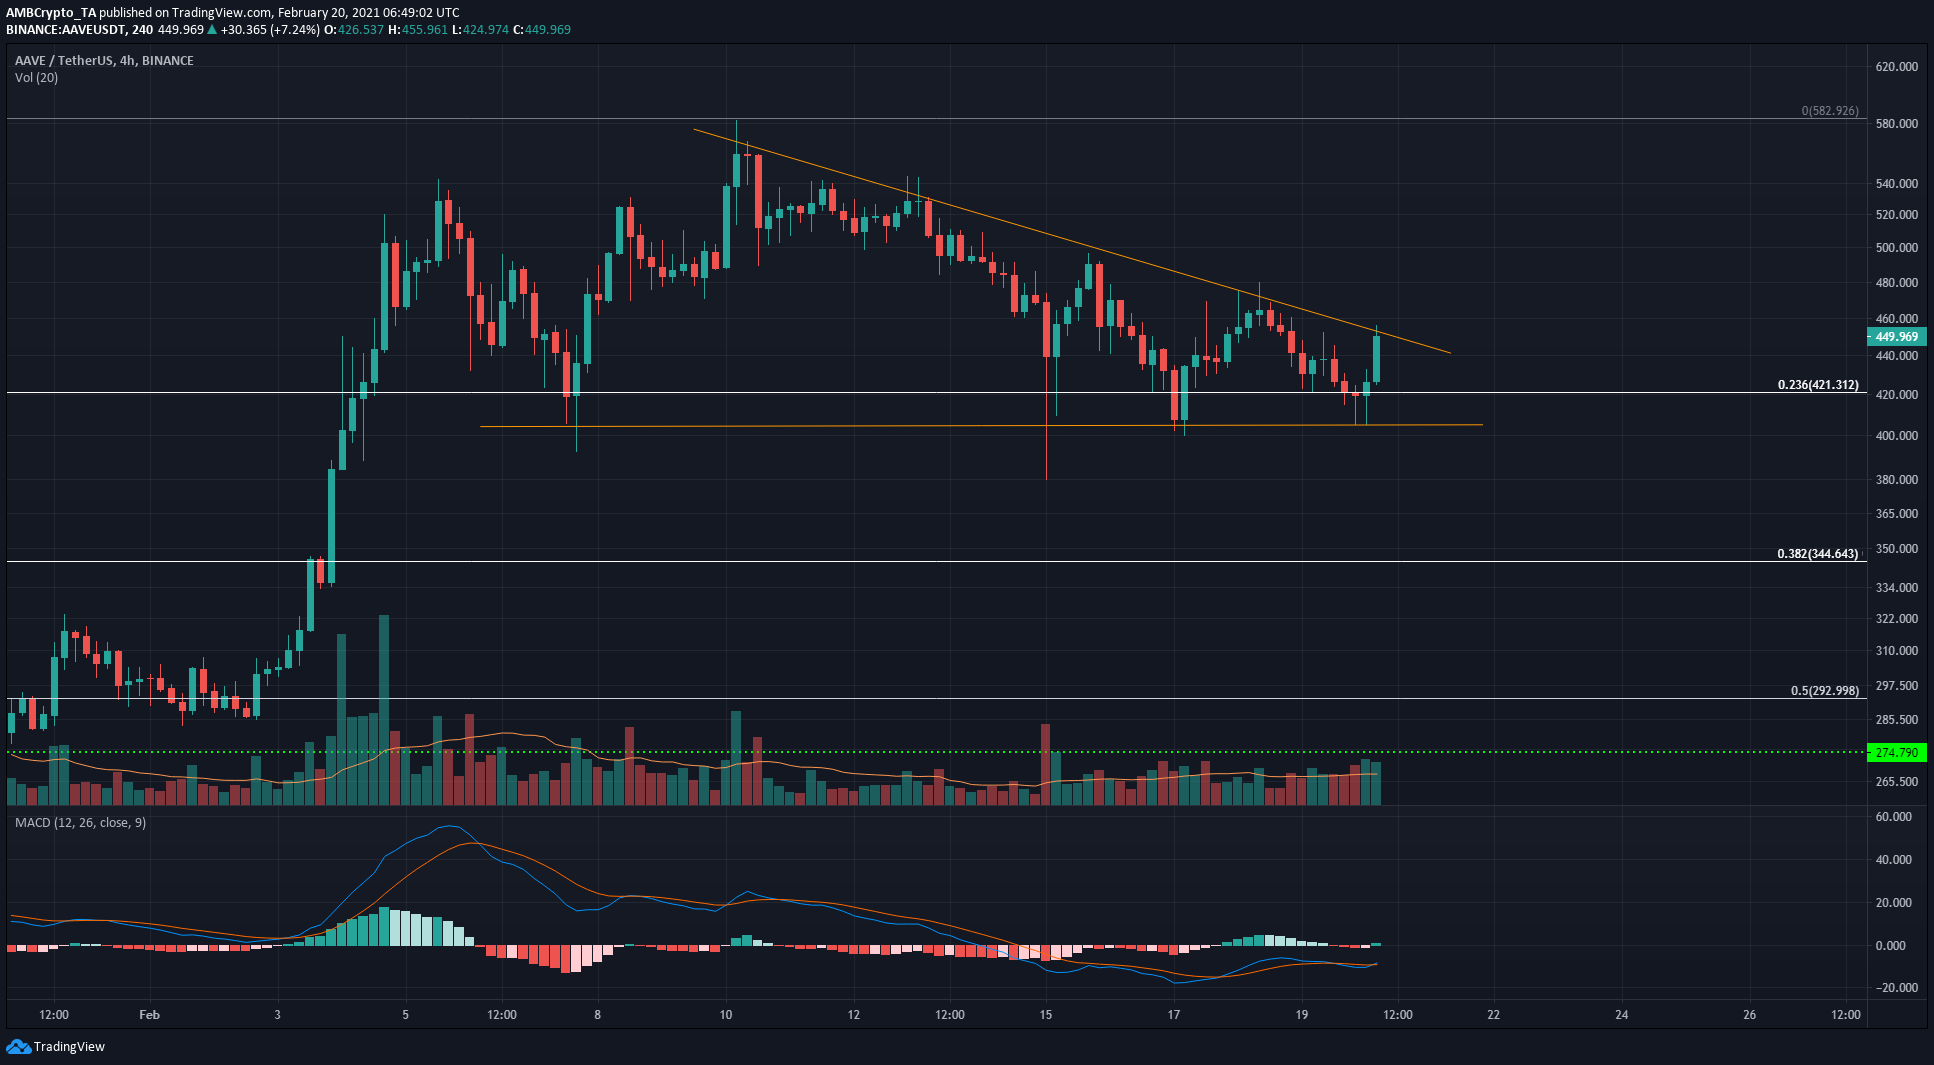 Chainlink, Aave, SushiSwap Price Analysis: 20 February